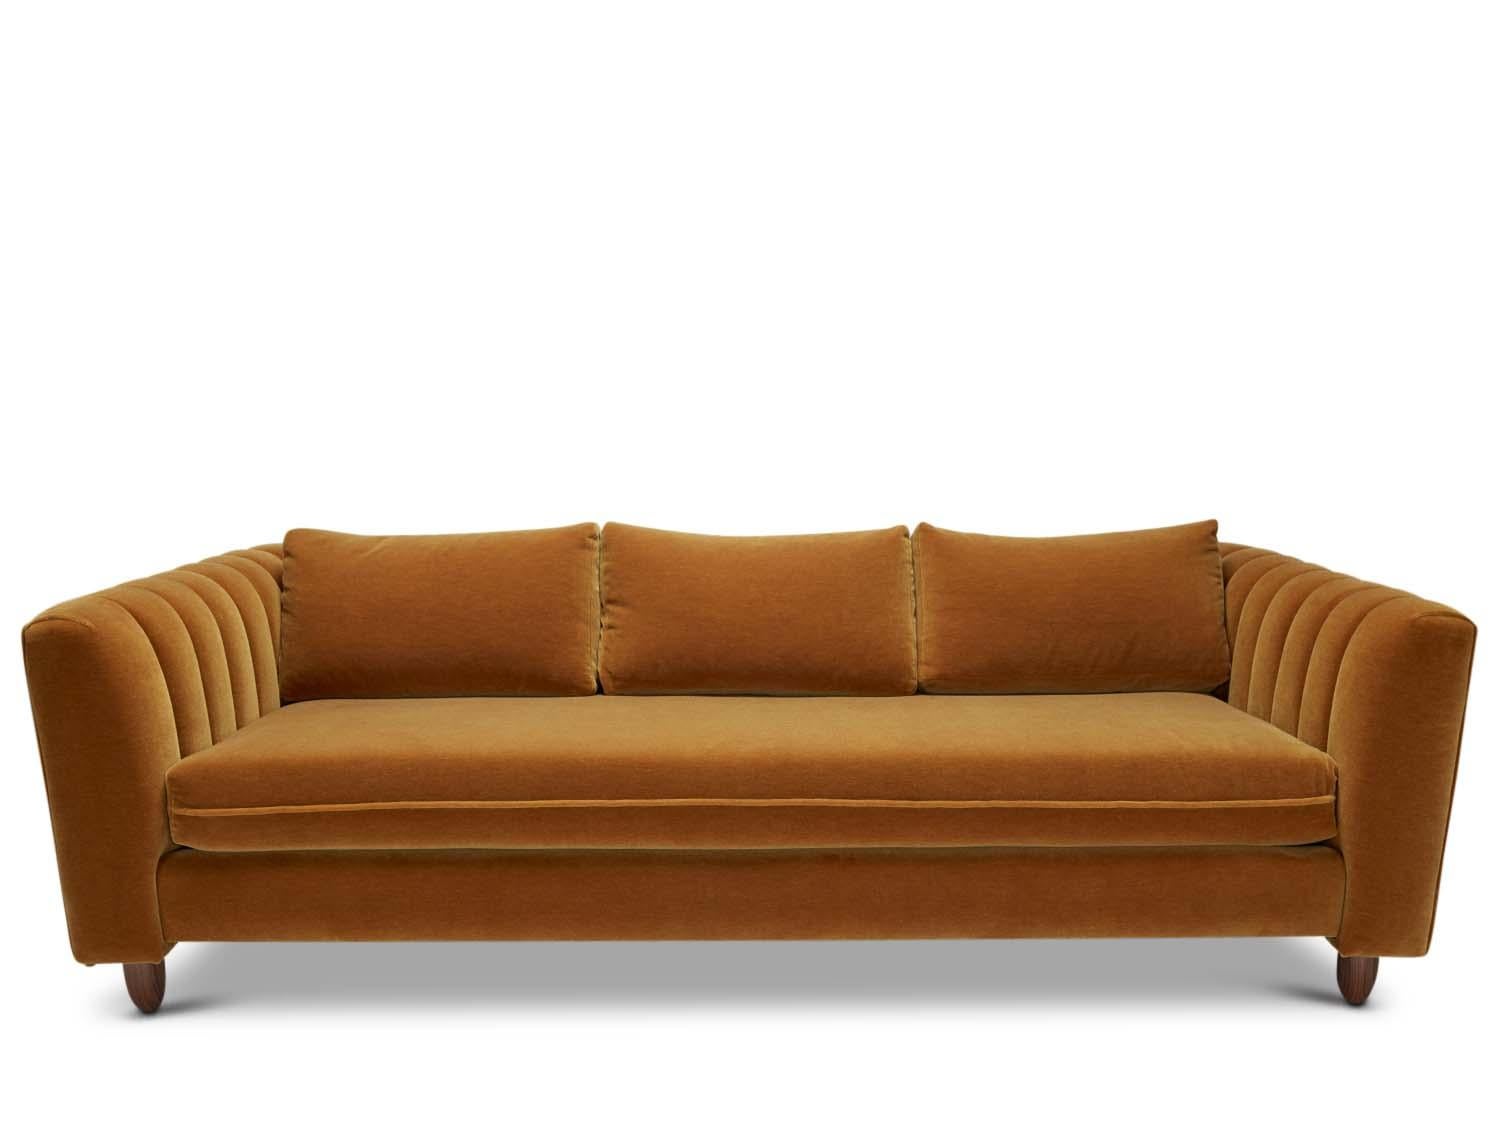 The isherwood sofa features a channel tufted body with loose bolster cushions. The turned legs are made of solid white oak or American walnut and are inset on the sides revealing the leg detail. 

The Lawson-Fenning Collection is designed and